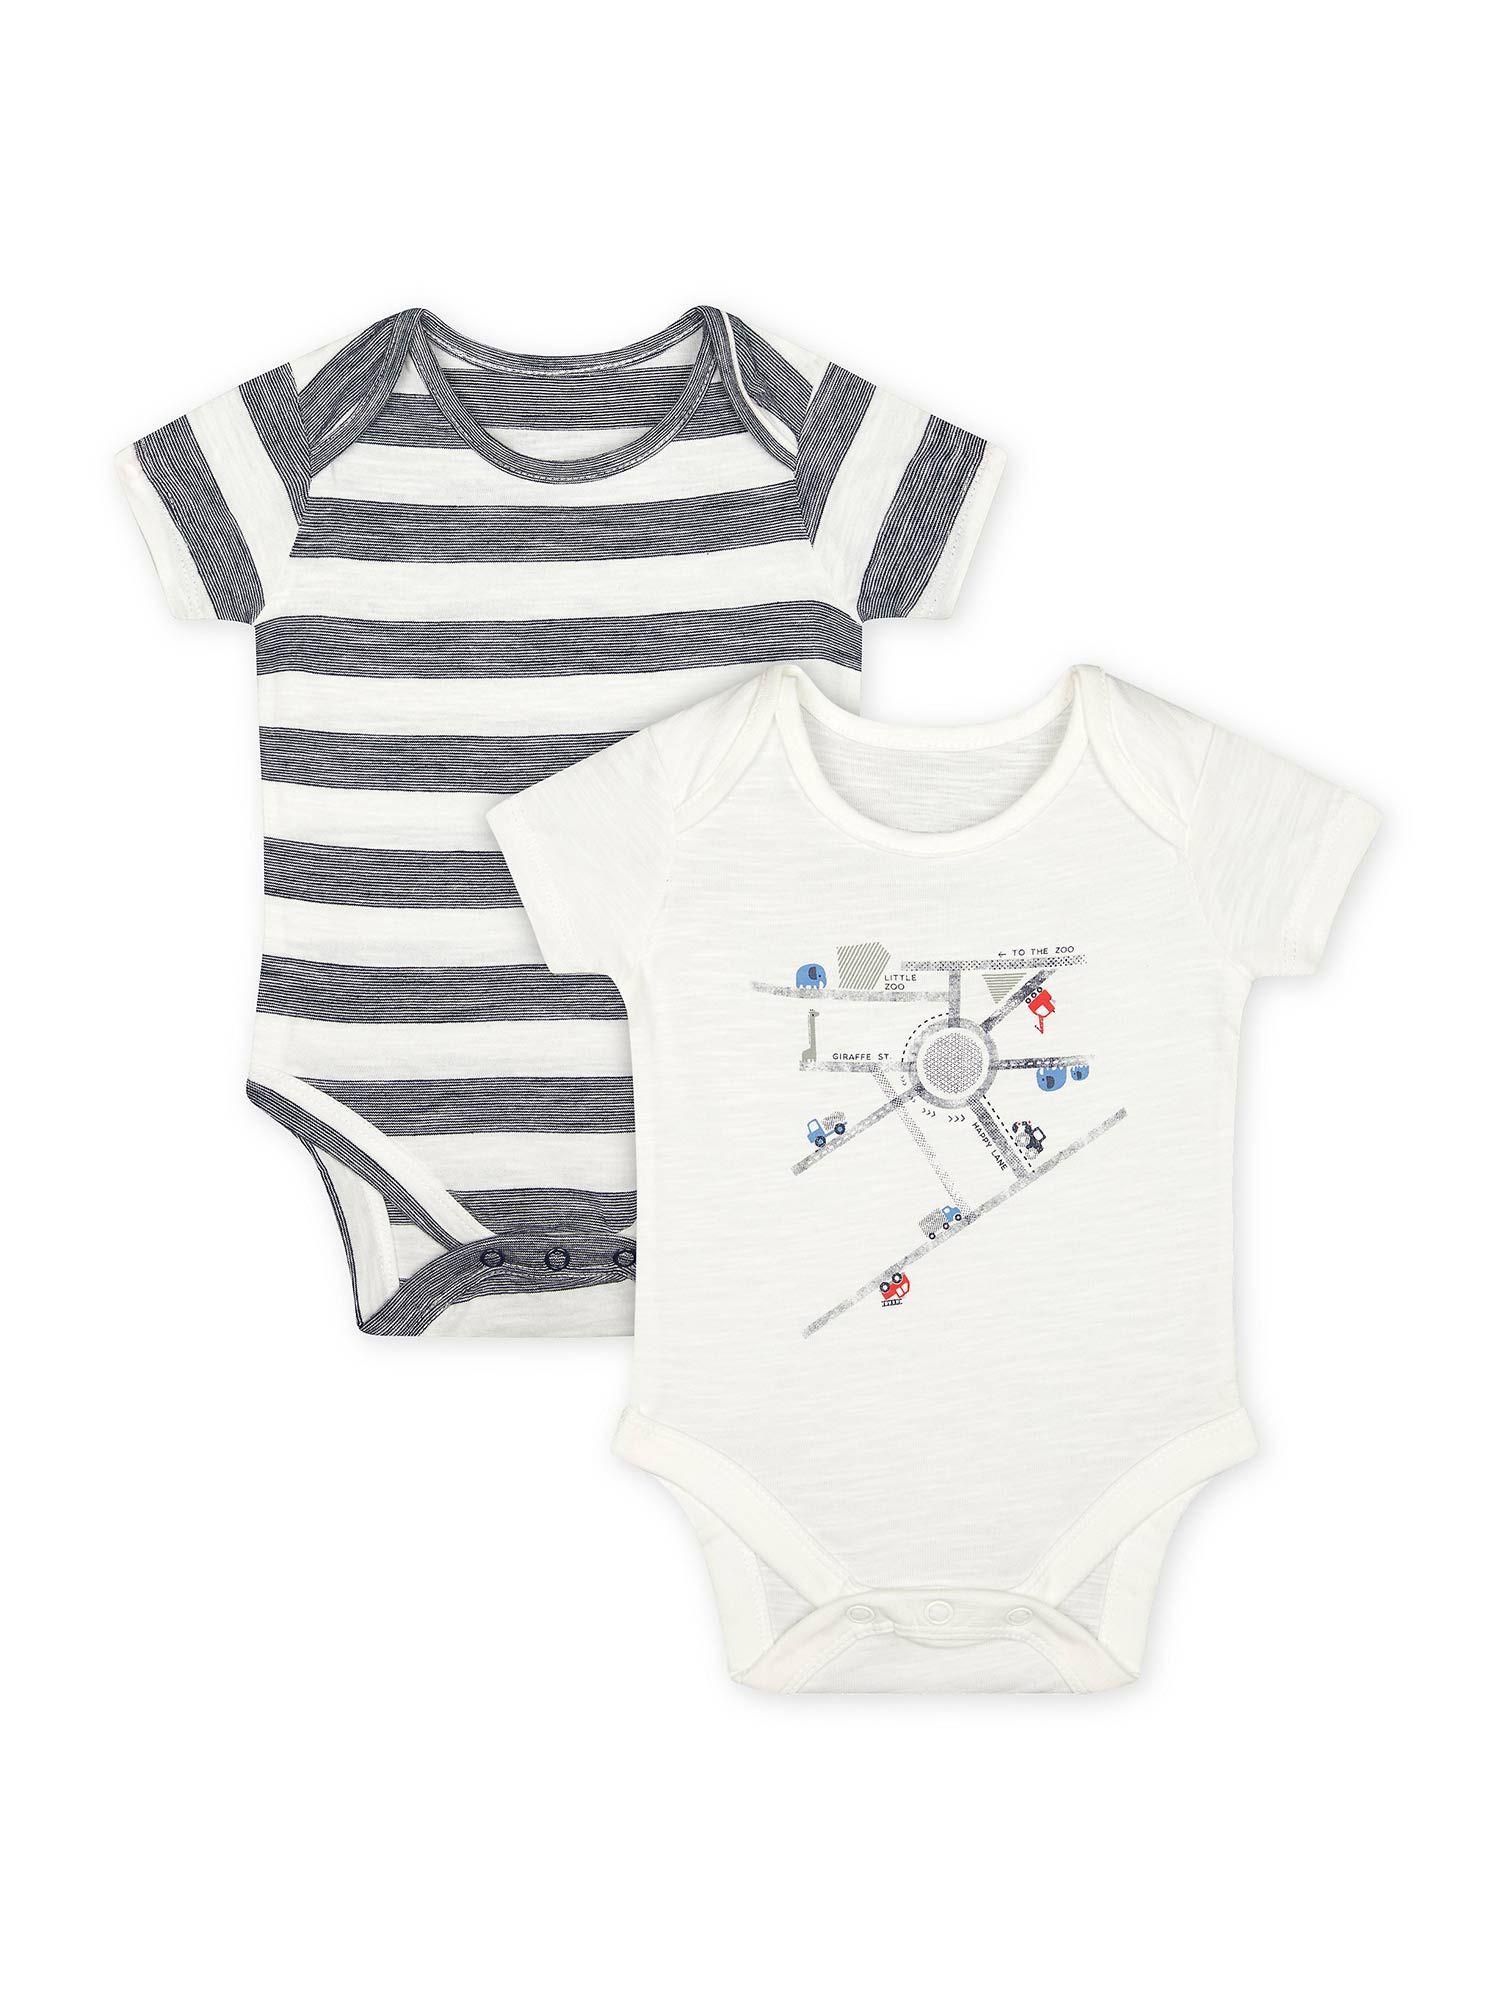 boys-half-sleeves-bodysuit-striped-and-printed-(pack-of-2)